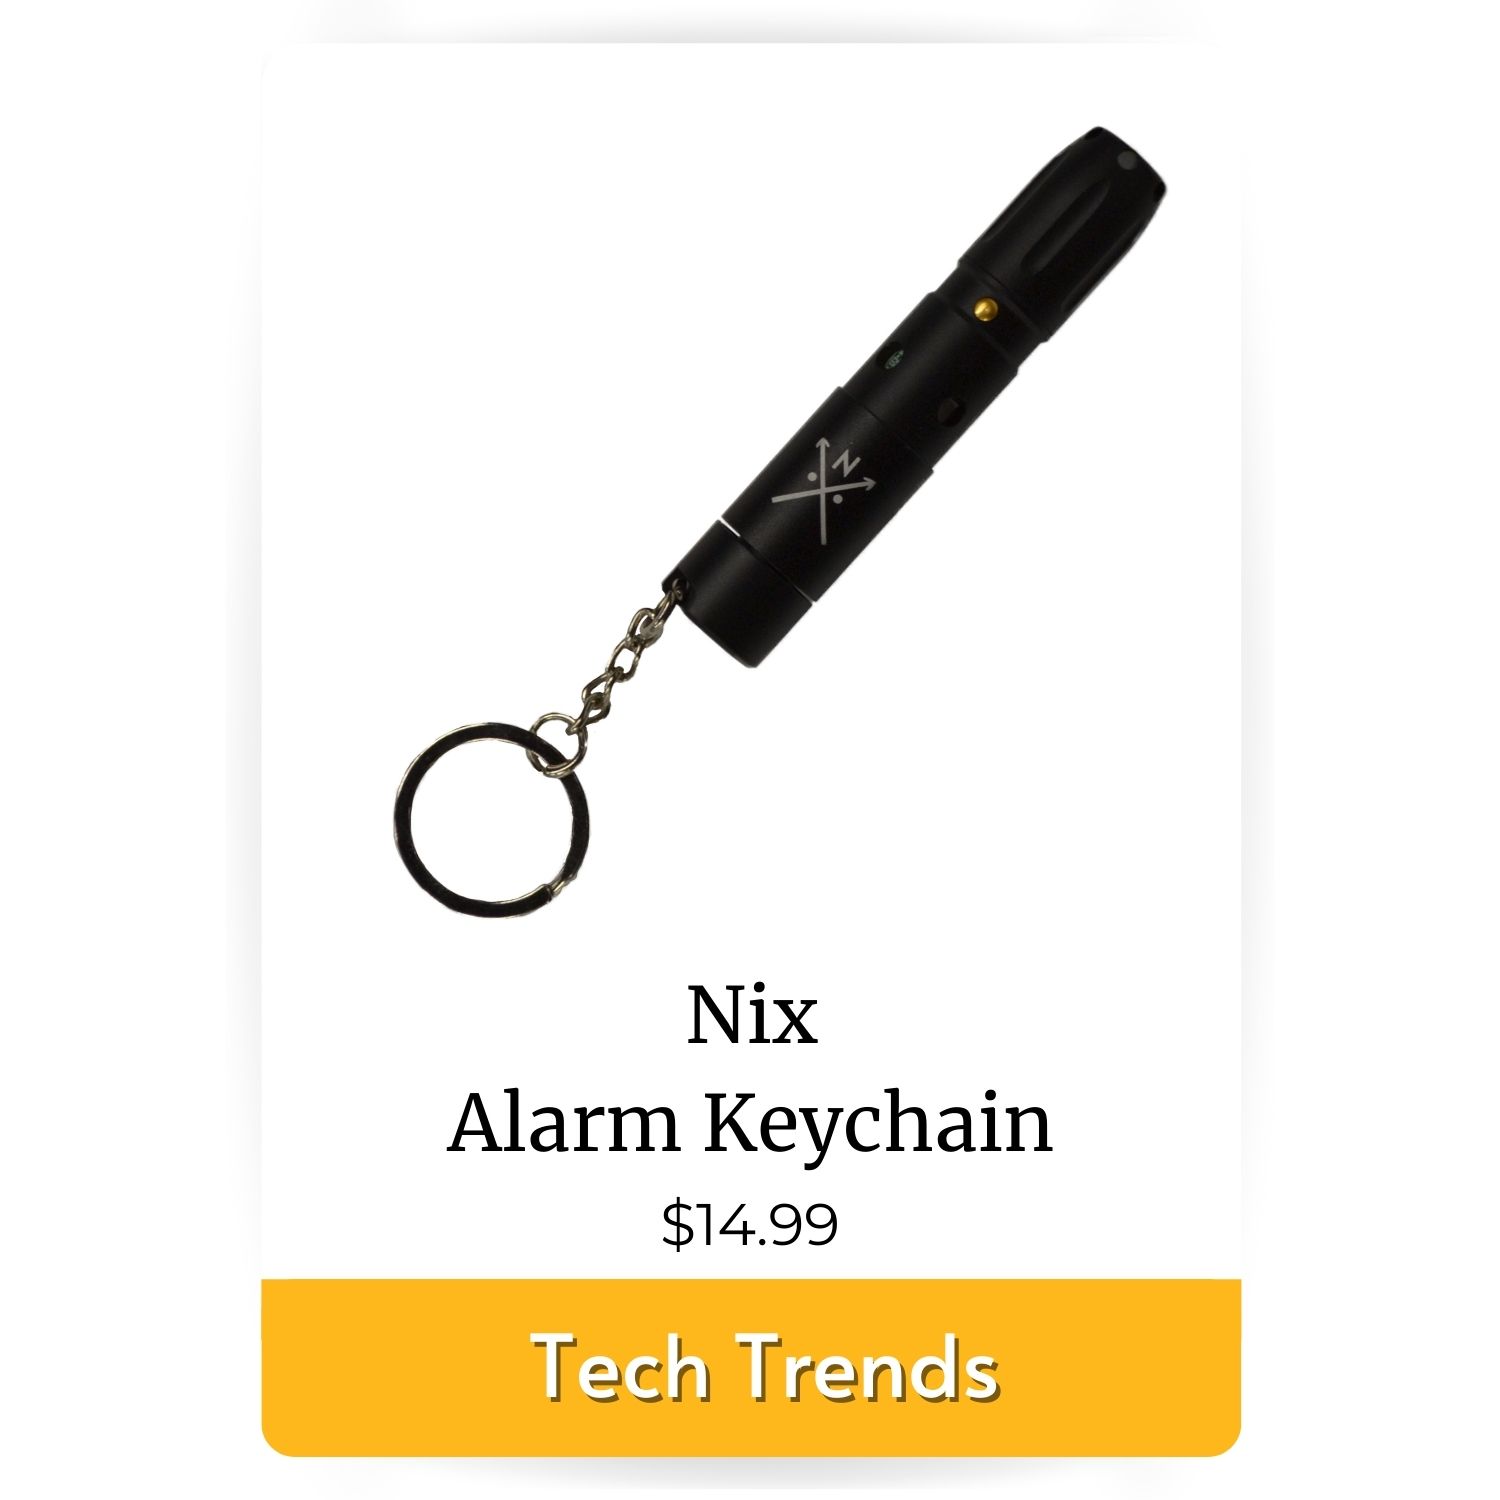 tech trends featured product Nix Alarm Keychain 14.99 dollars